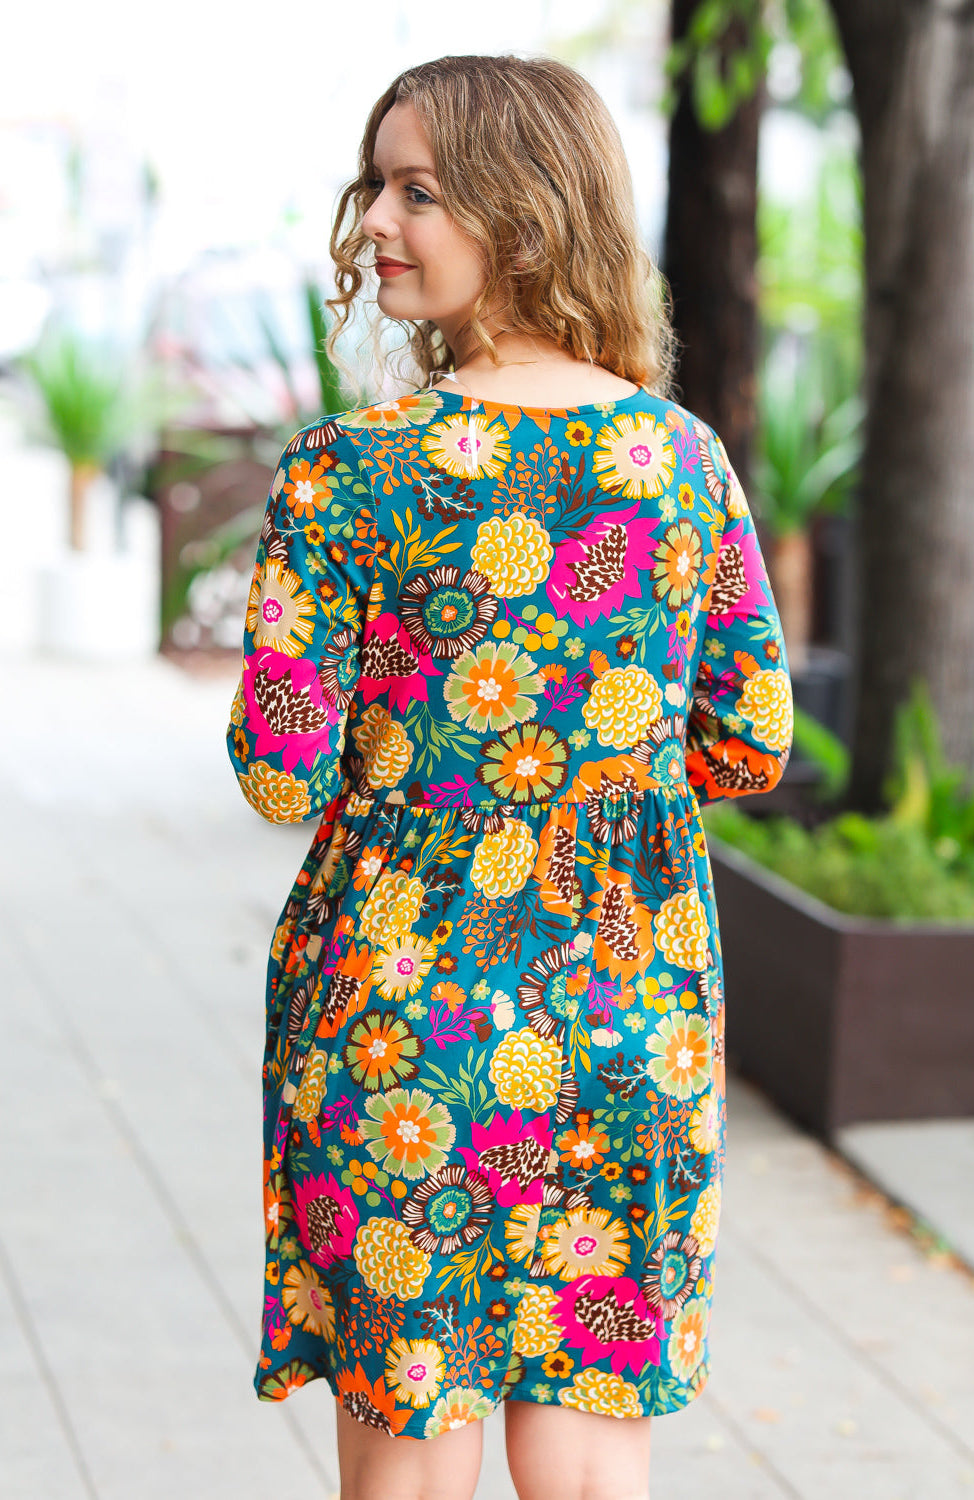 All About It Teal Vibrant Floral Pocketed Dress Haptics